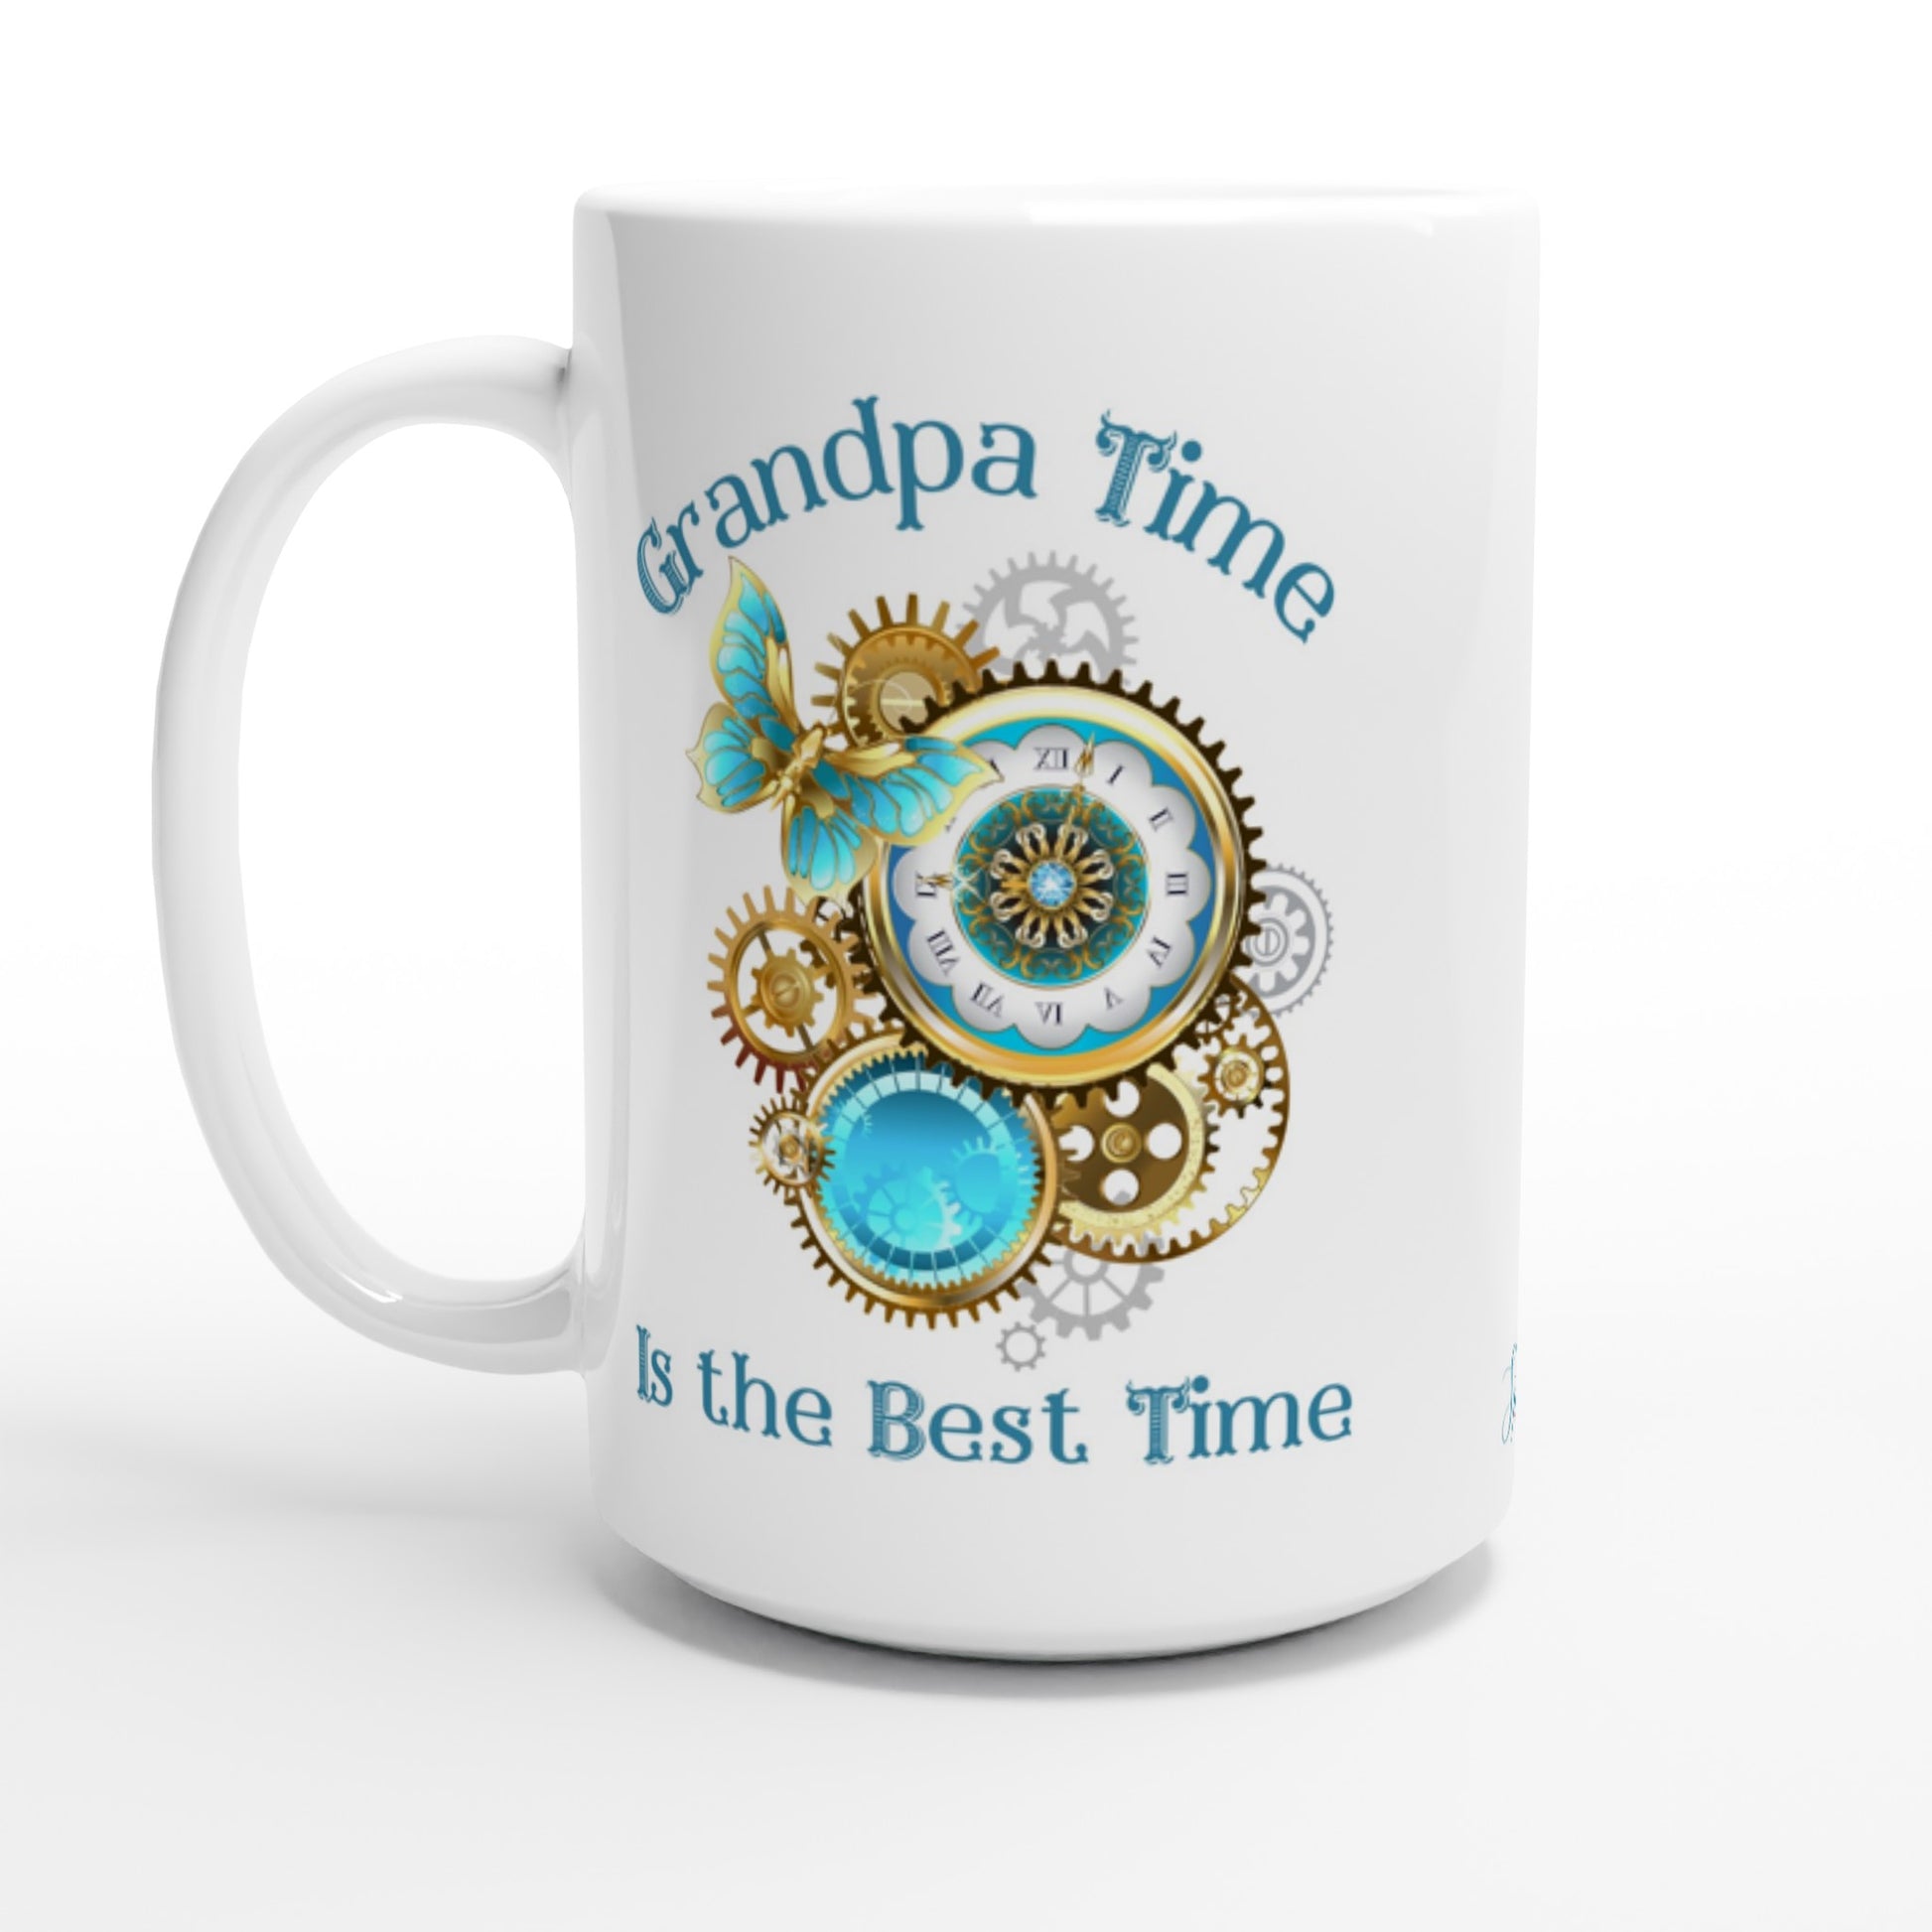 "Grandpa Time is the Best Time" Customizable Photo Mug 15 oz. front view